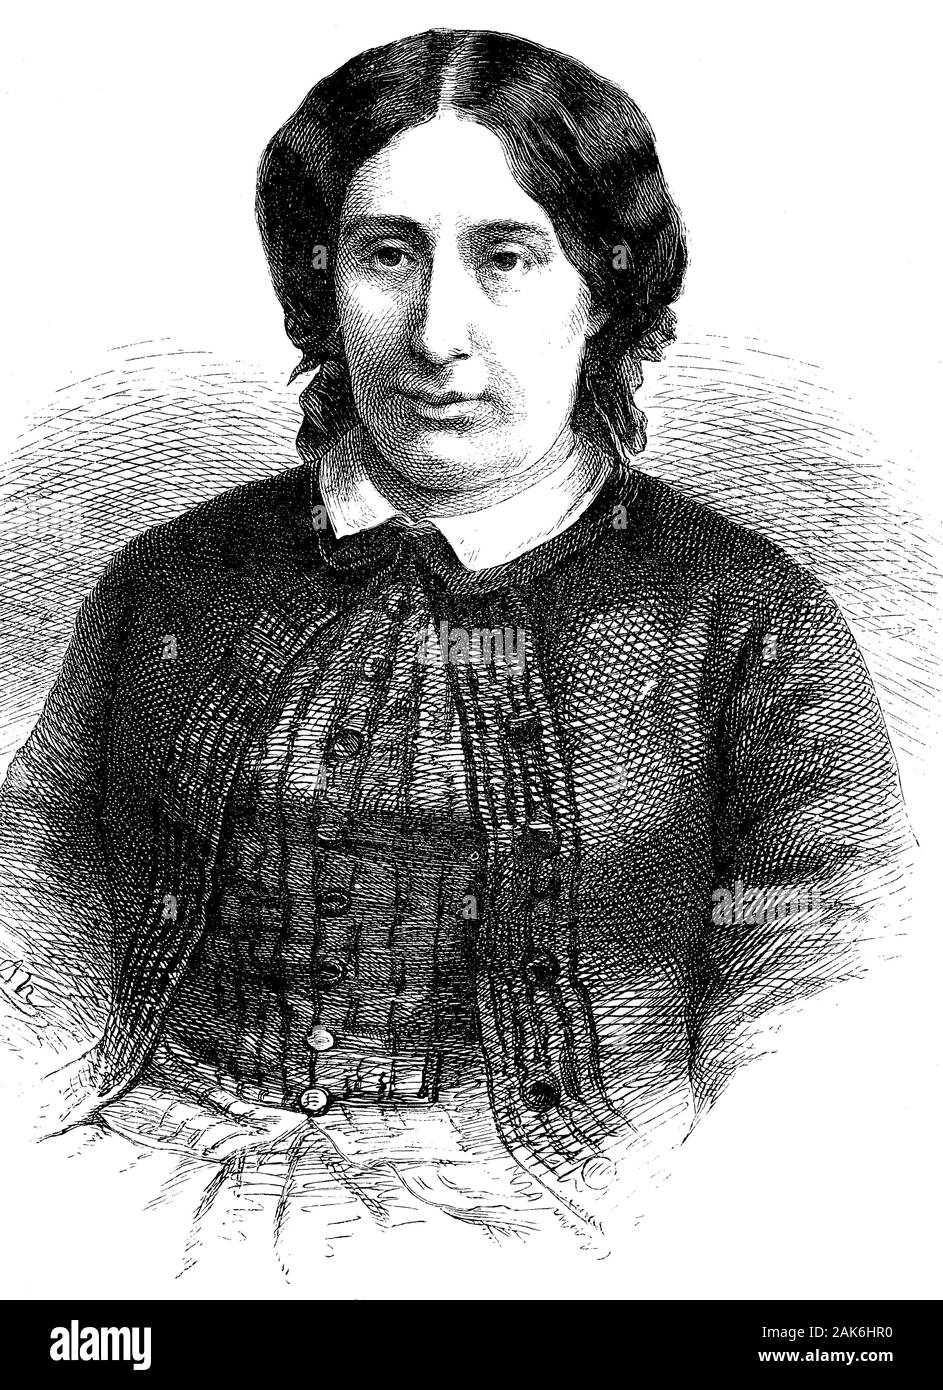 George Sand, 1804-1876, actually Amandine Aurore Lucile Dupin de Francueil, was a French writer, woodcut from 1864 Stock Photo